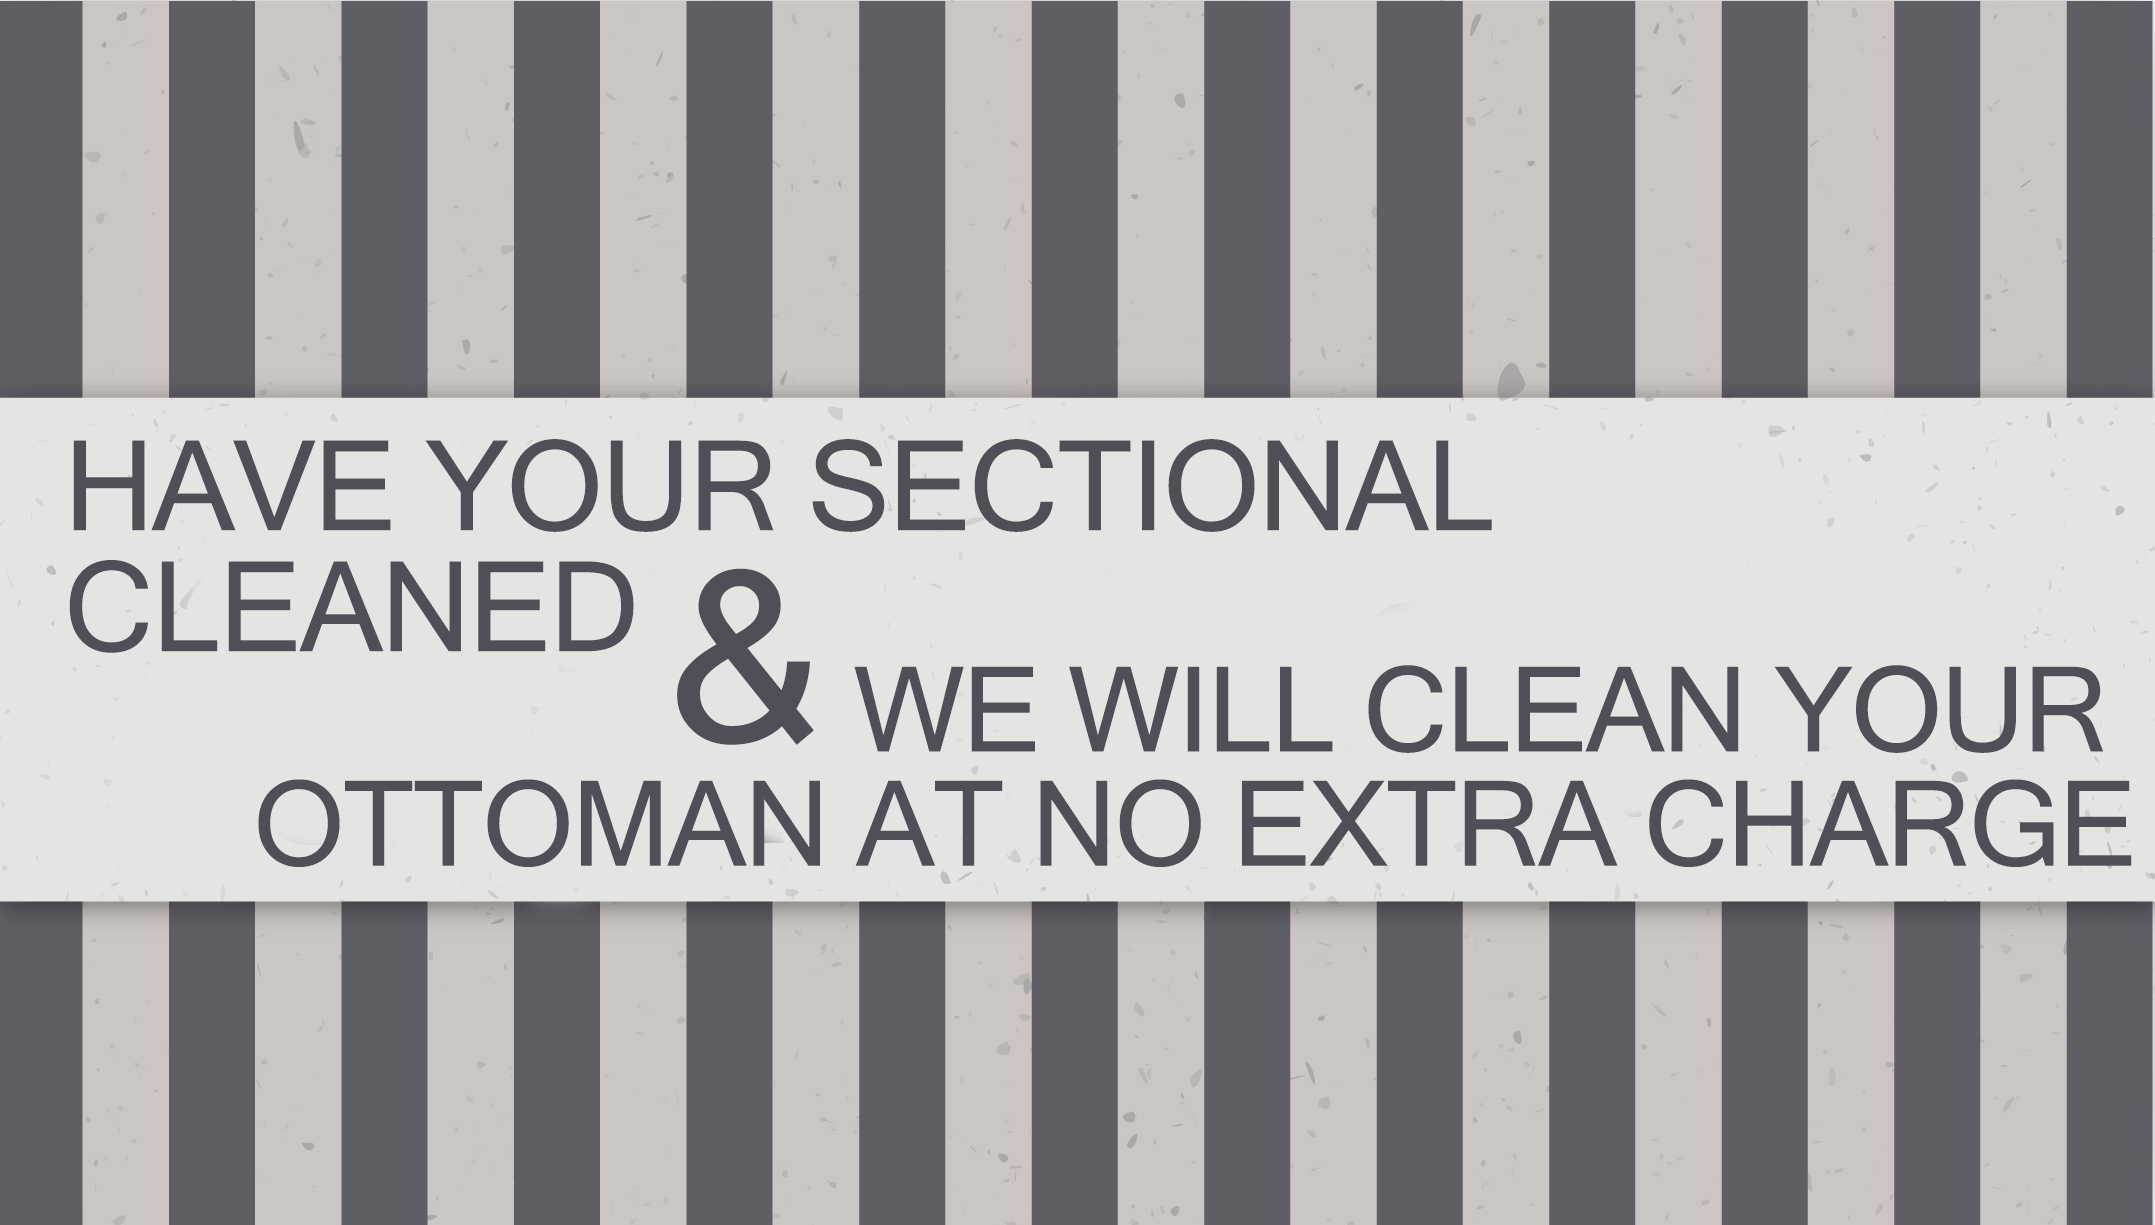 HAVE YOUR SECTIONAL CLEANED and WE WILL CLEAN YOUR OTTOMAN AT NO EXTRA CHARGE